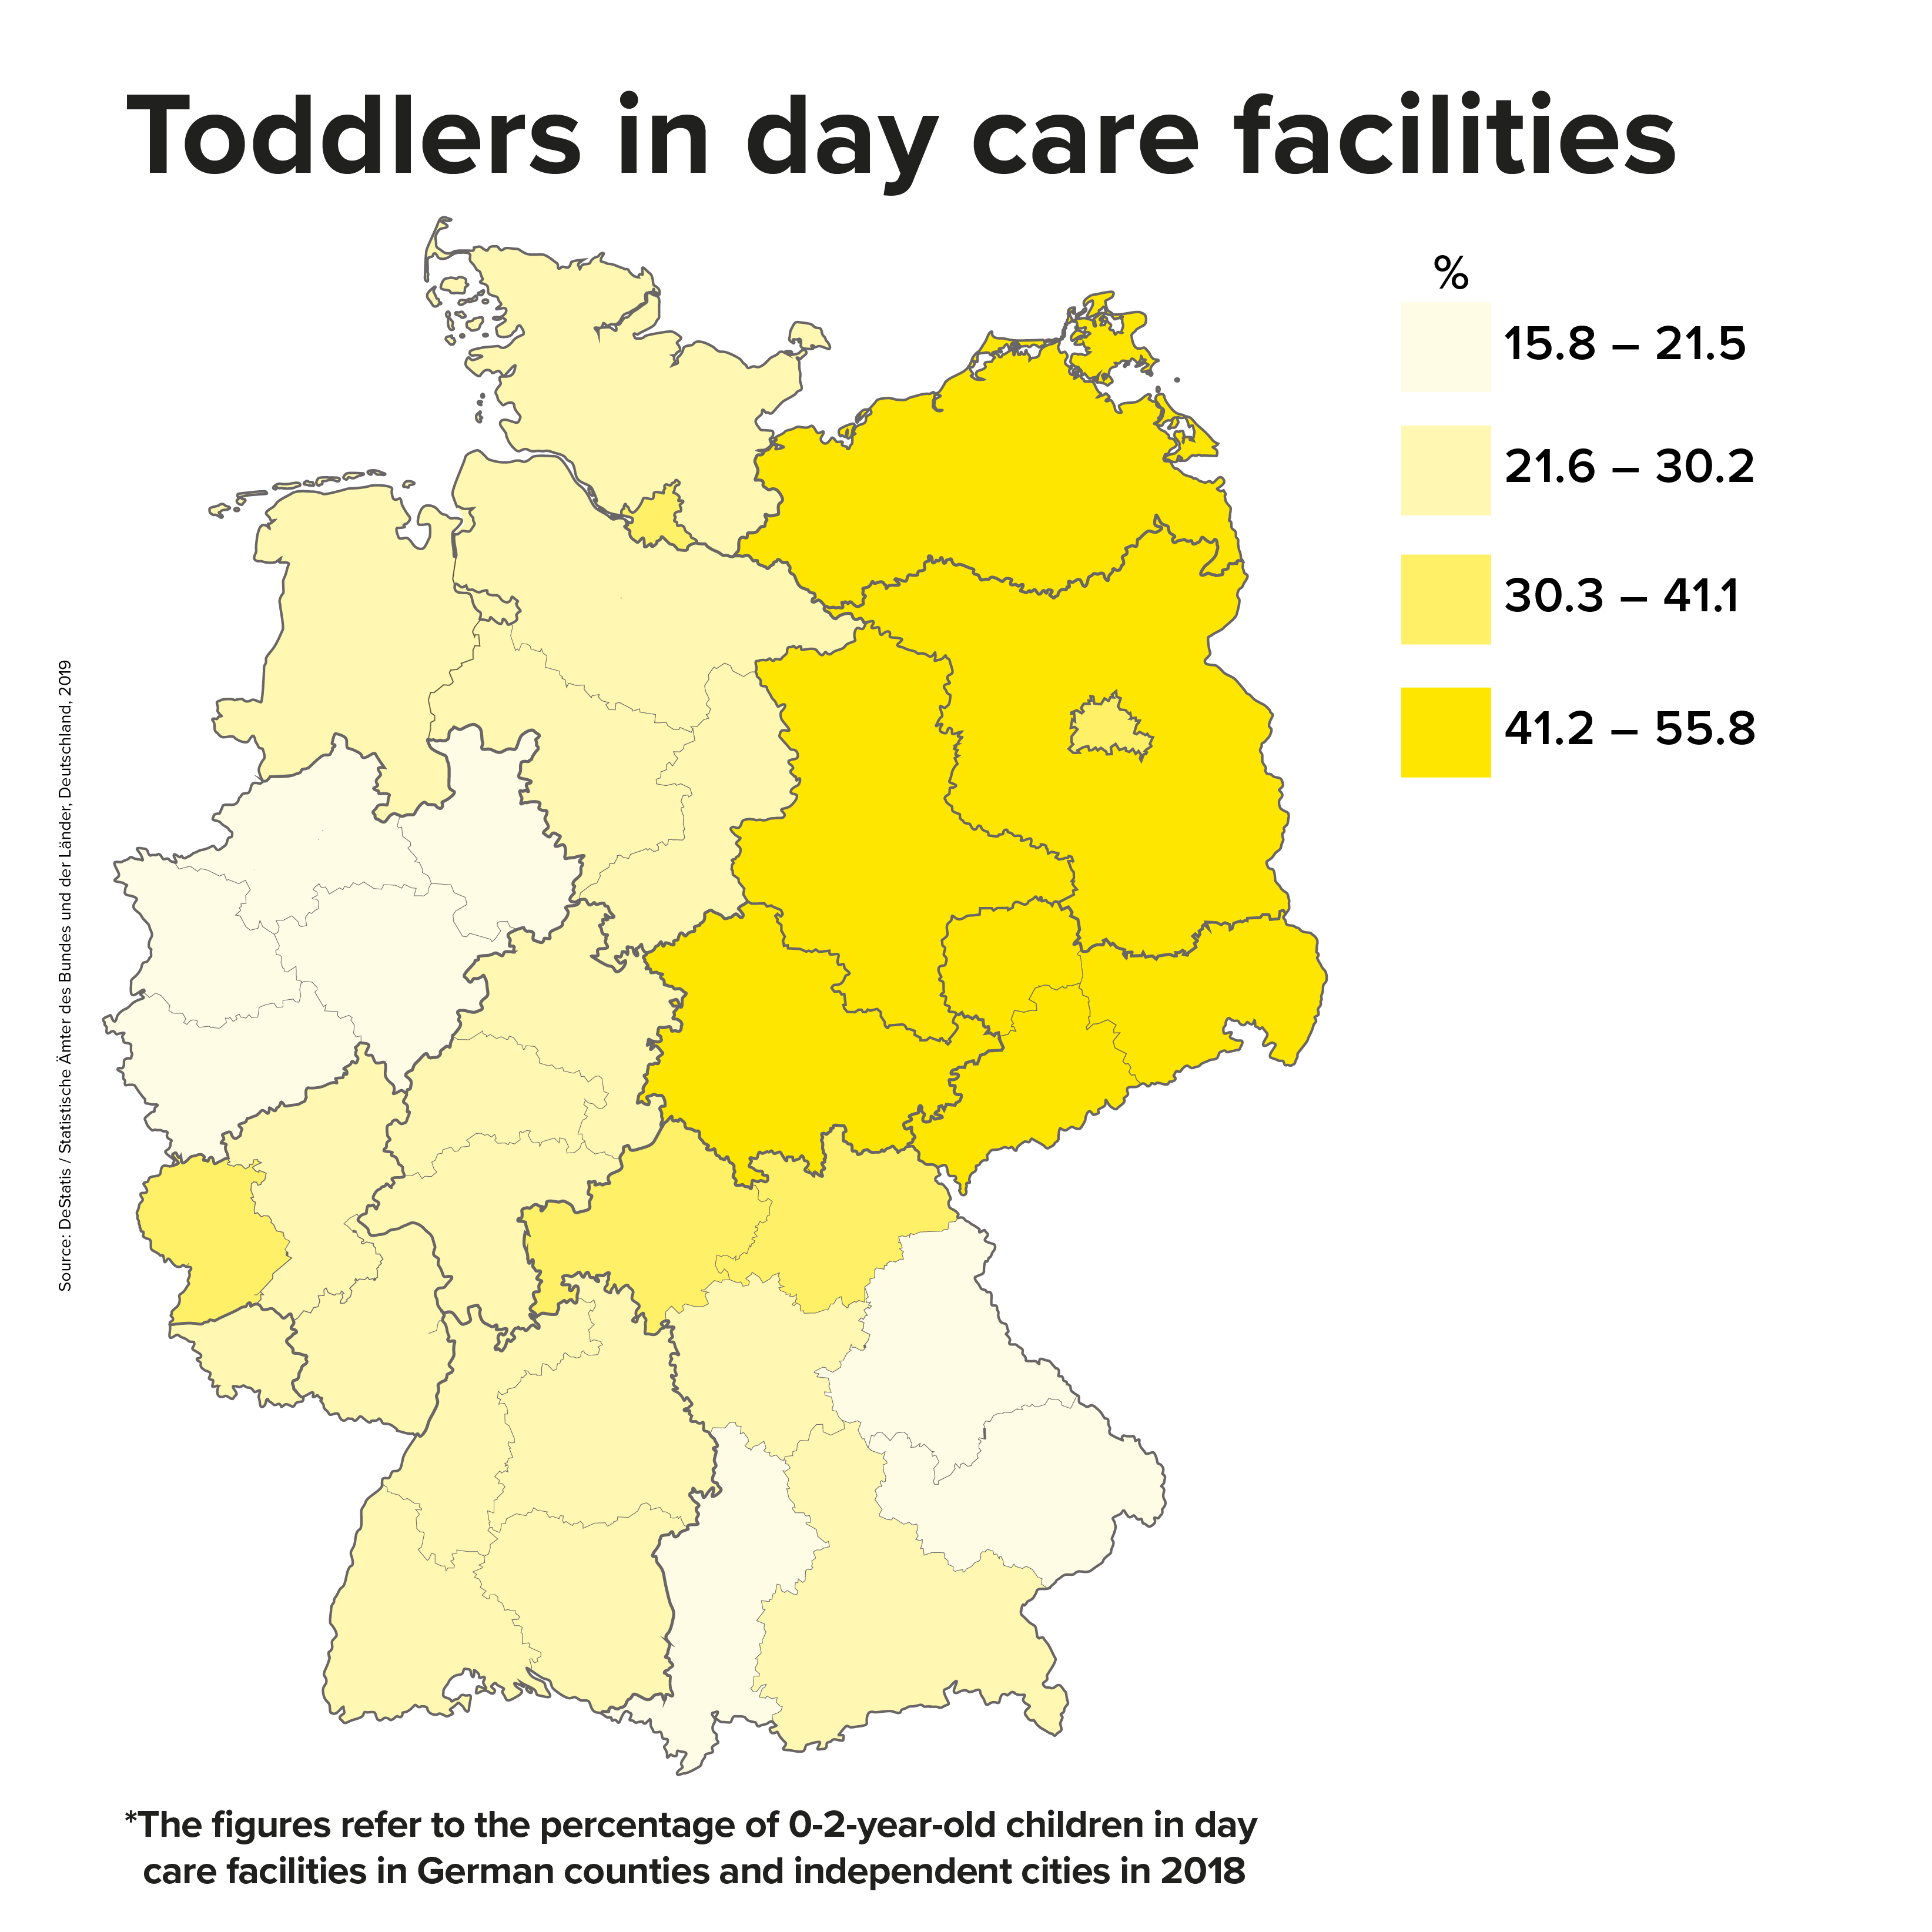 Germany: Toddlers in day care facilities